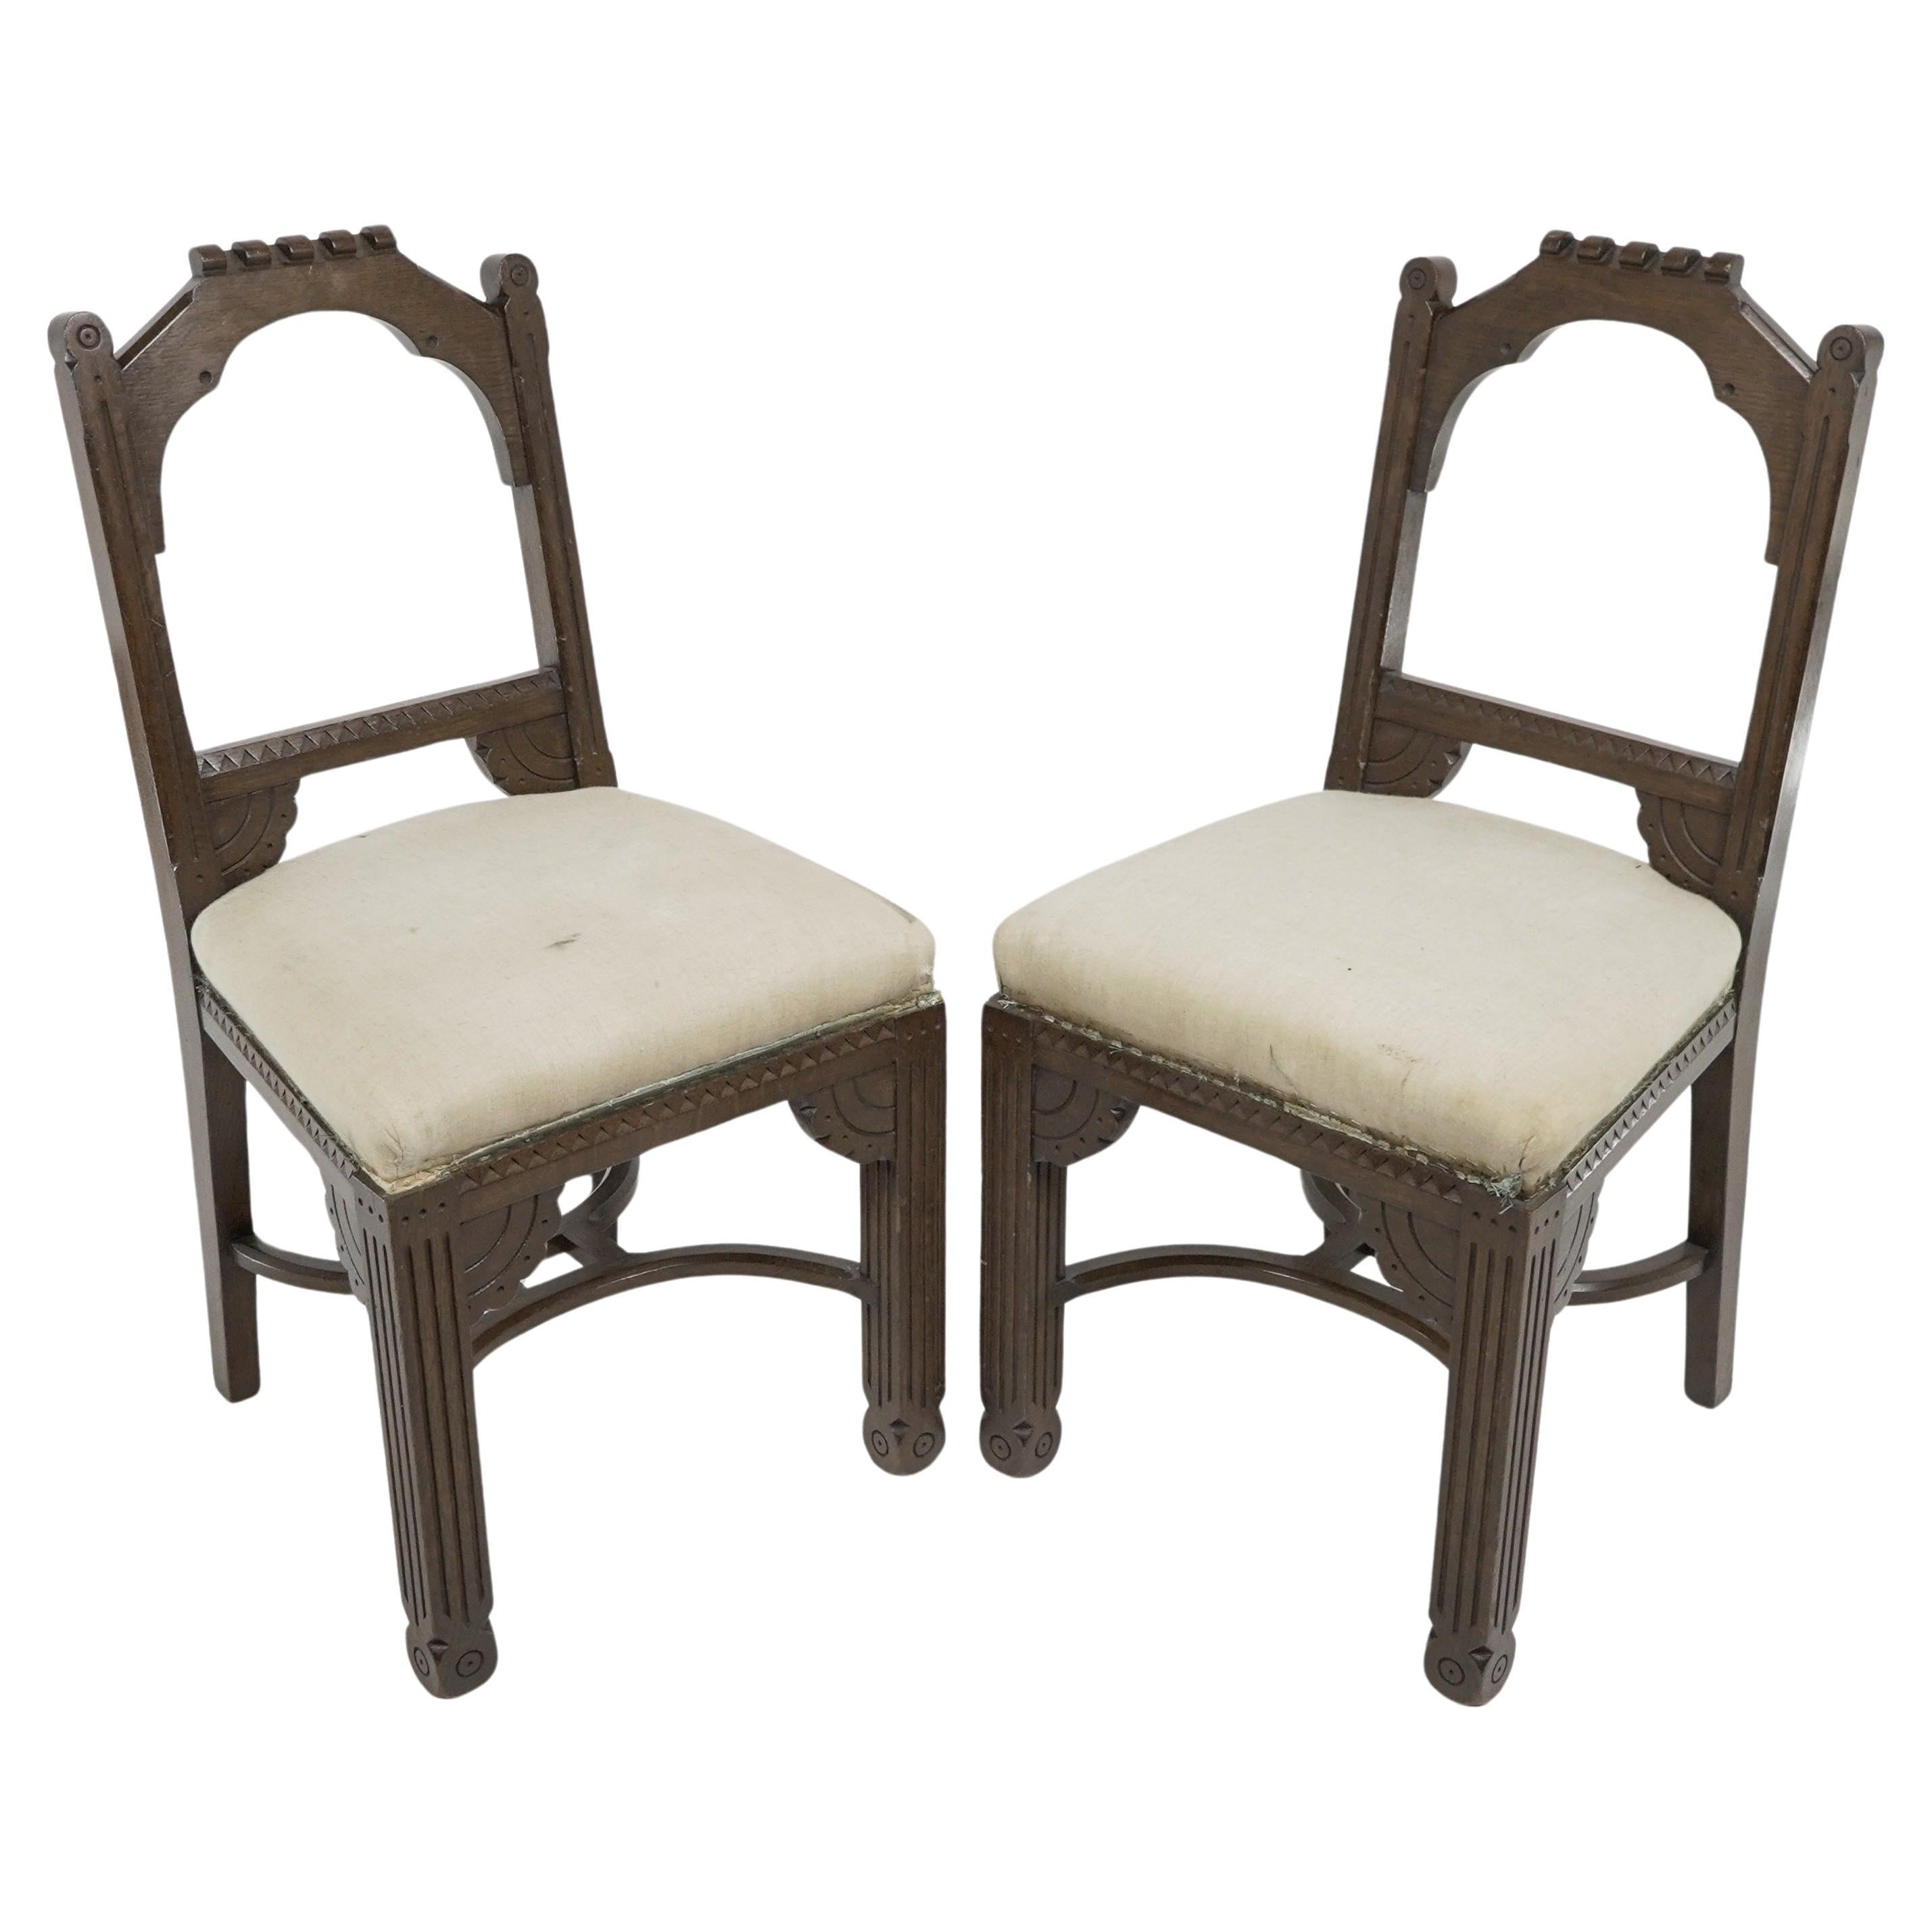 R Boyd. in the style of Dr C Dresser. A pair of oak side chairs